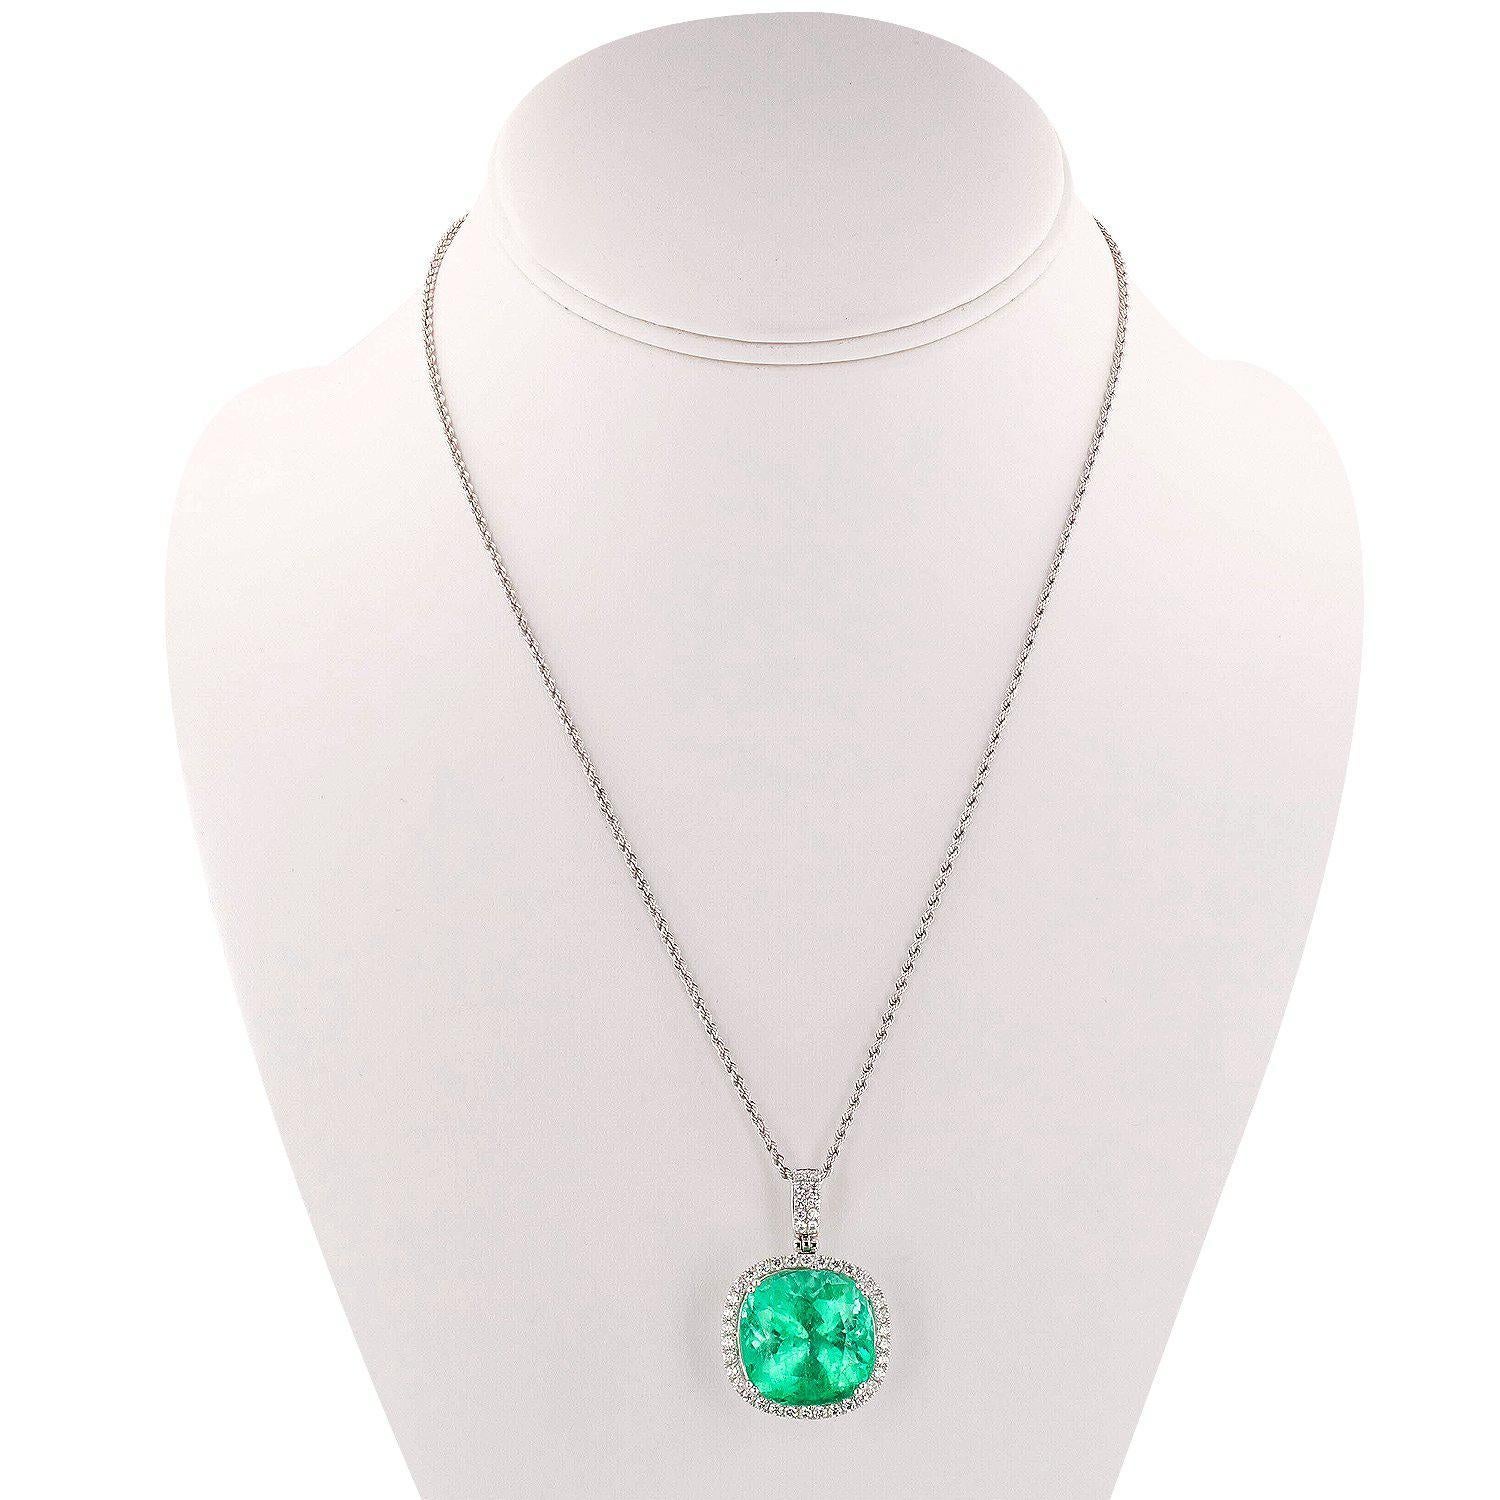 Contemporary GIA Certified 24.81 Carat Emerald Pendant Necklace For Sale